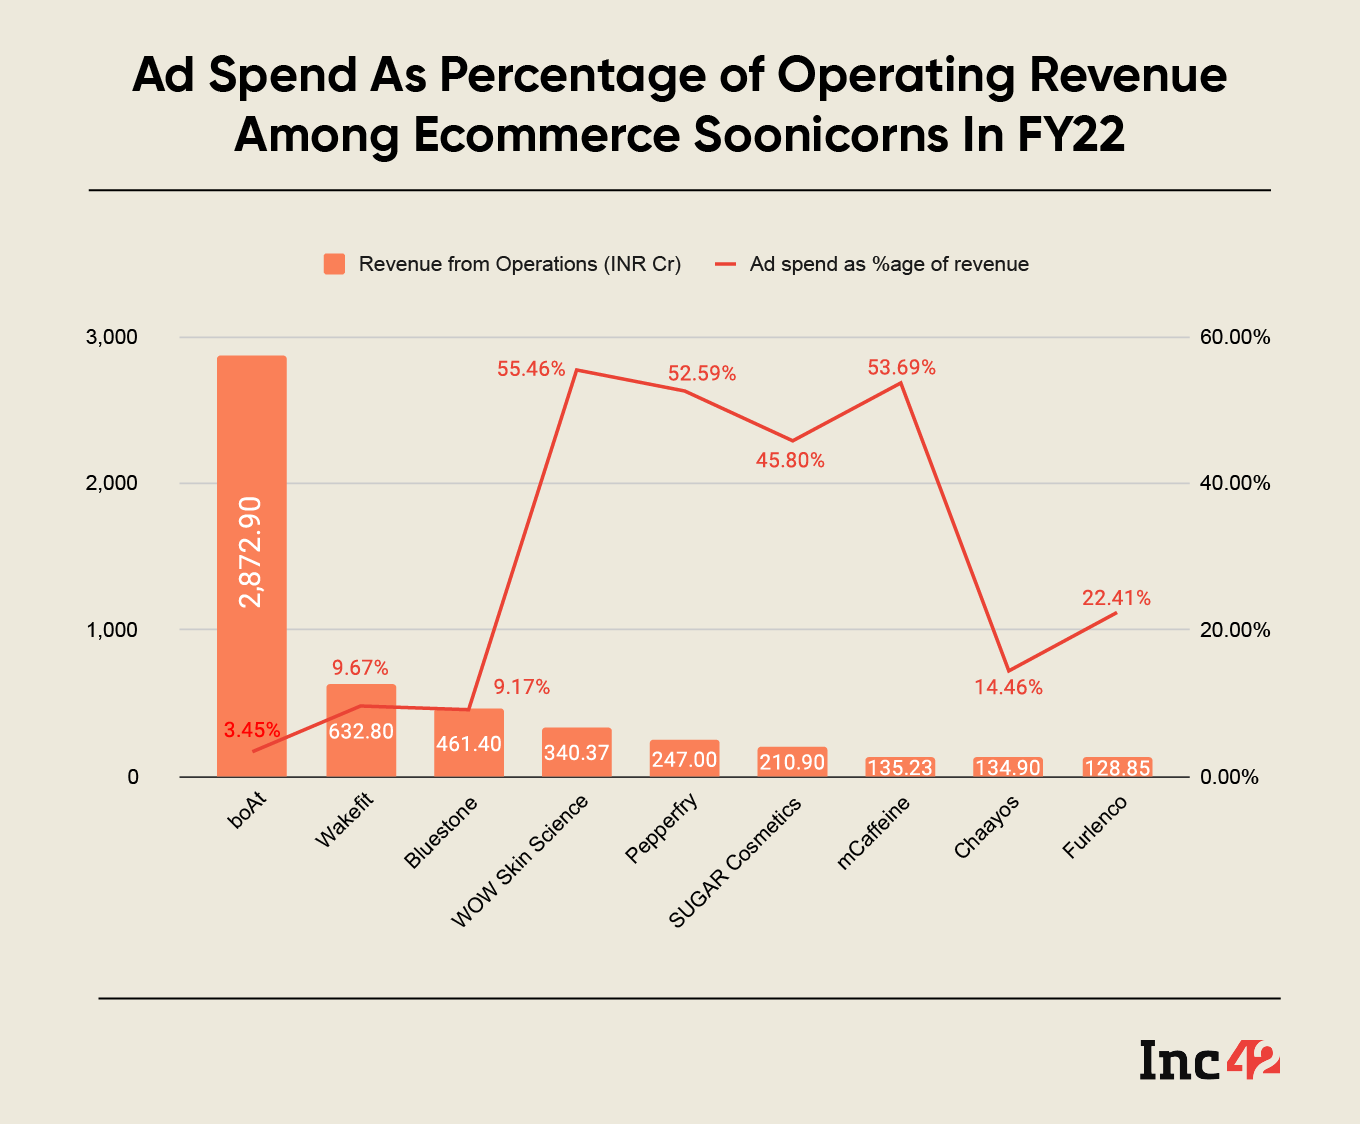 Ecommerce soonicorns marketing spending compared to revenue from operations